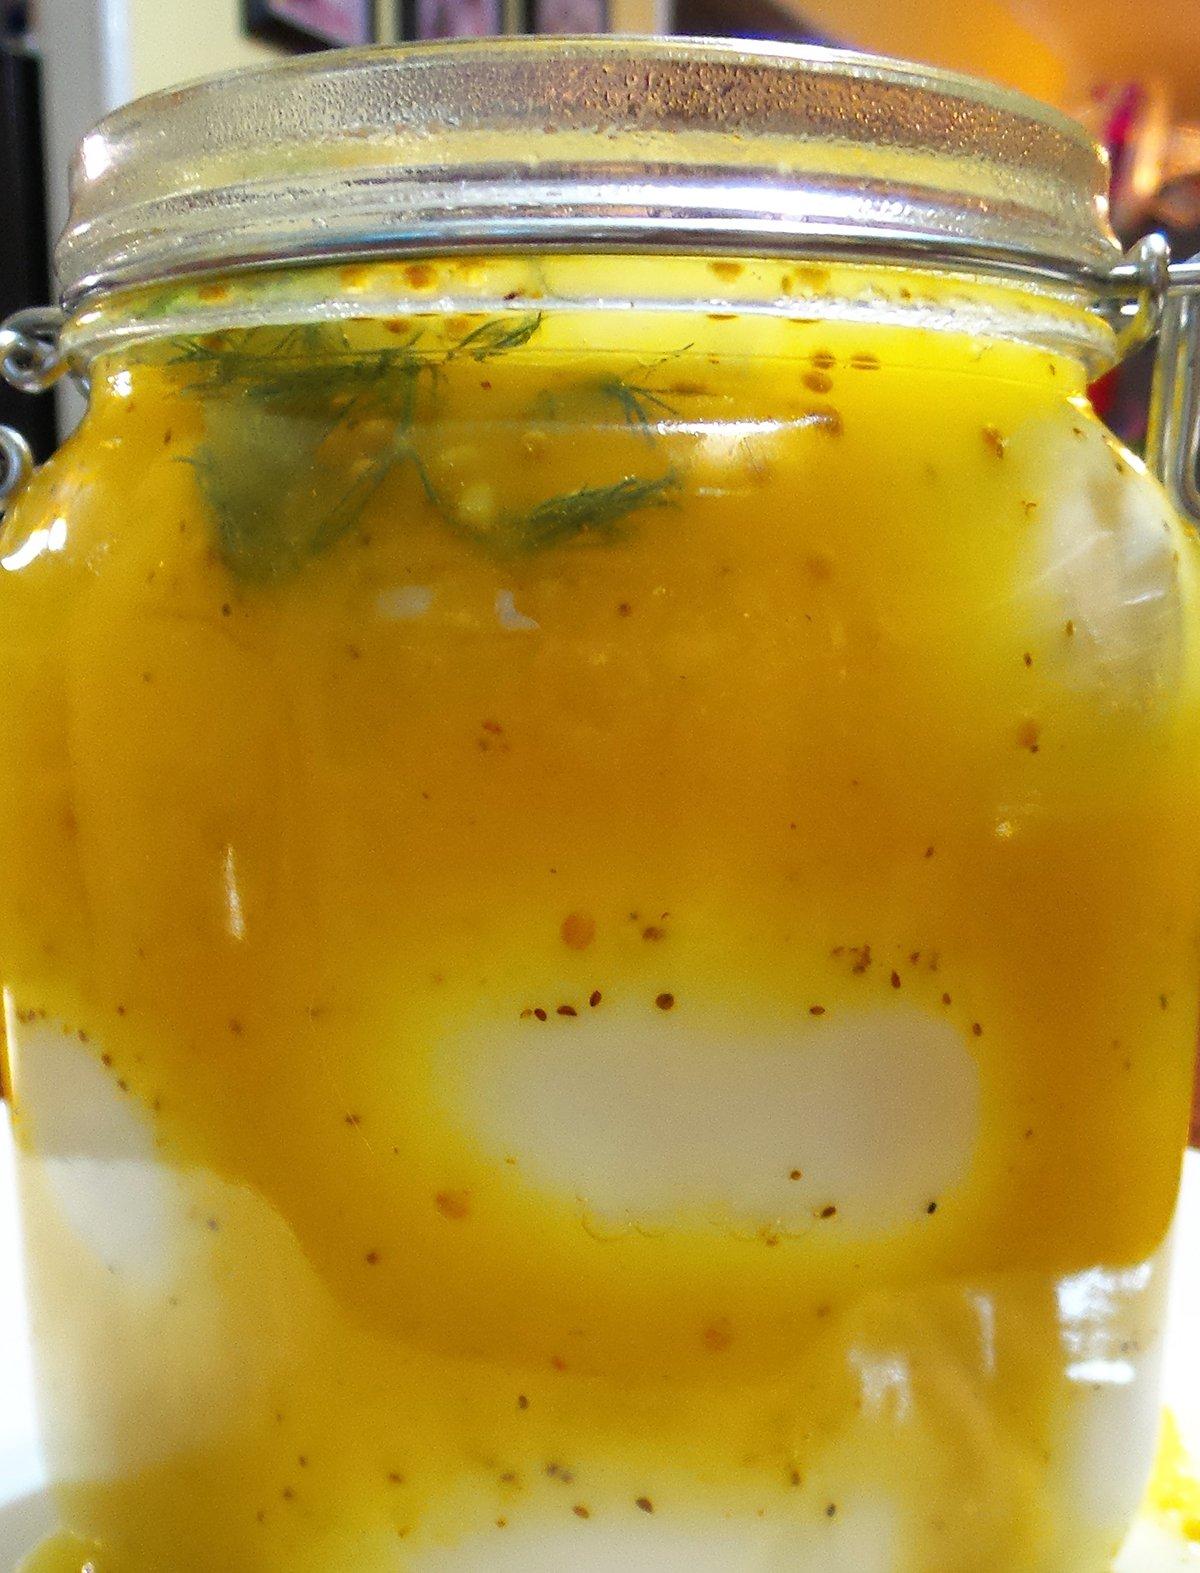 The longer the eggs remain in the pickling solution, the better the flavor.